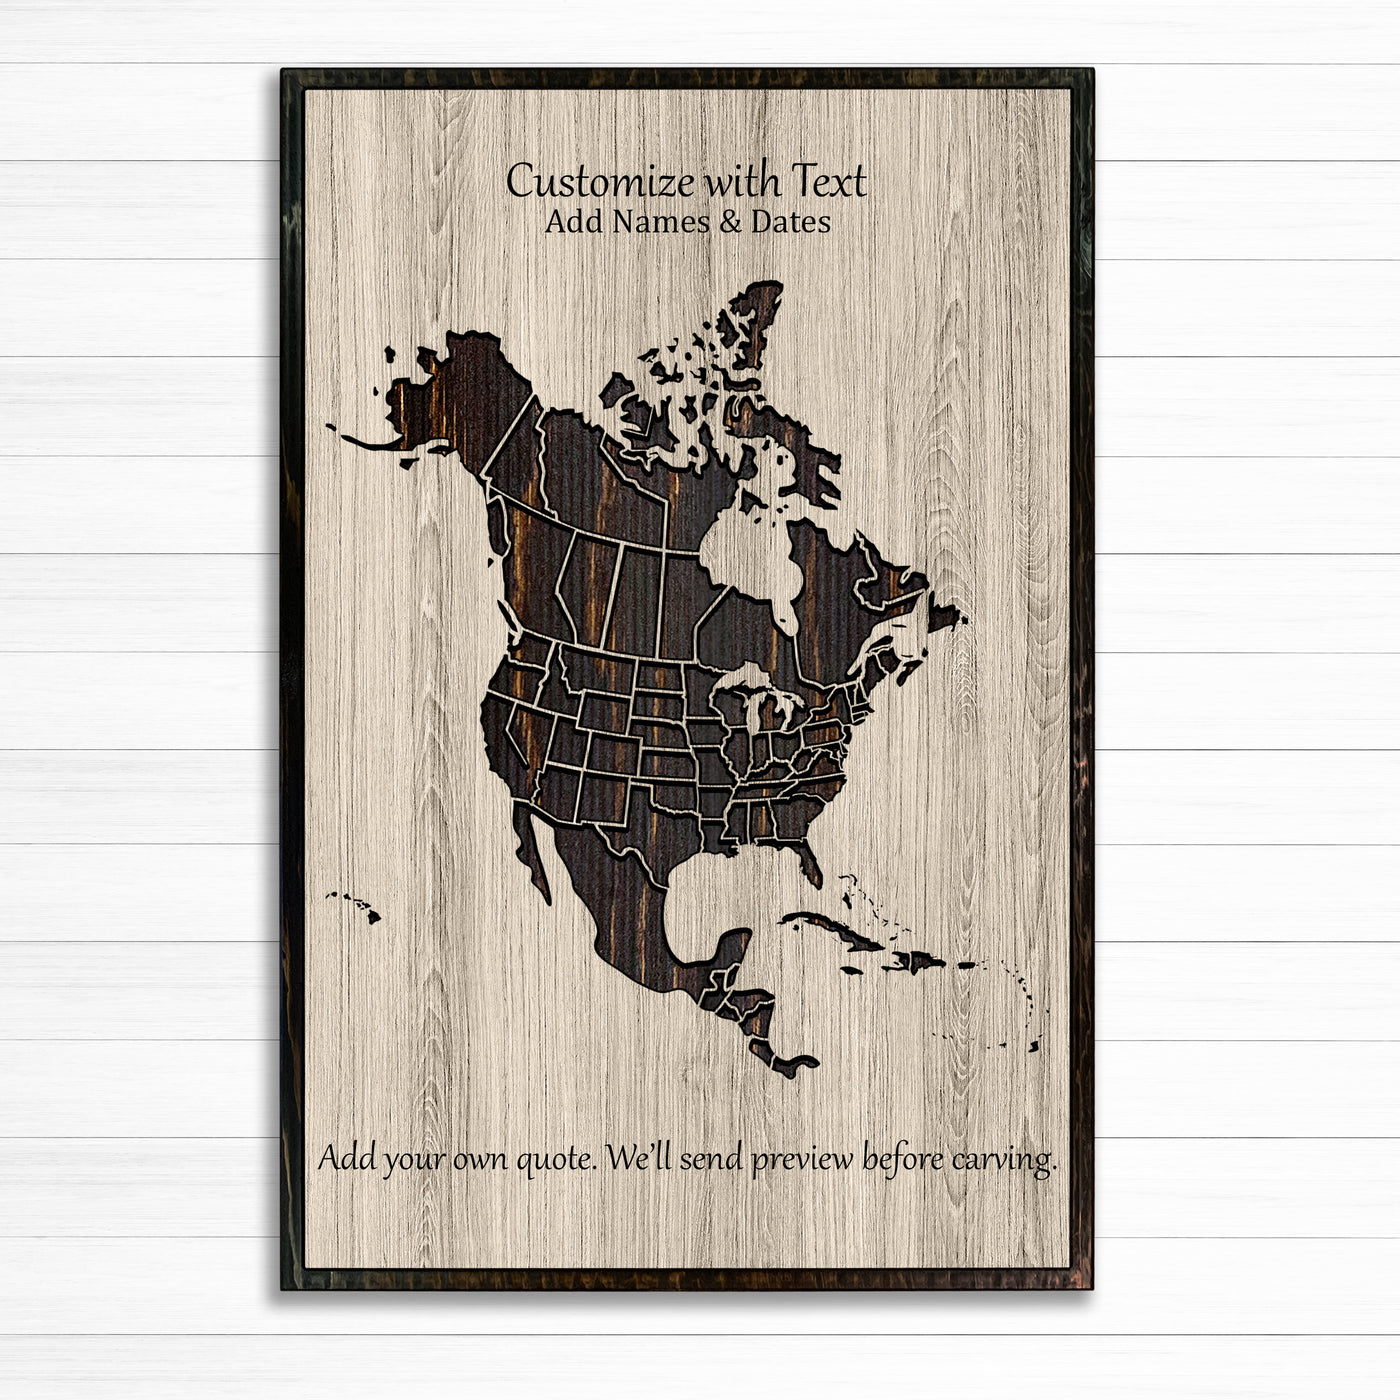 custom wood carved north america push pin map that can be personalized with text